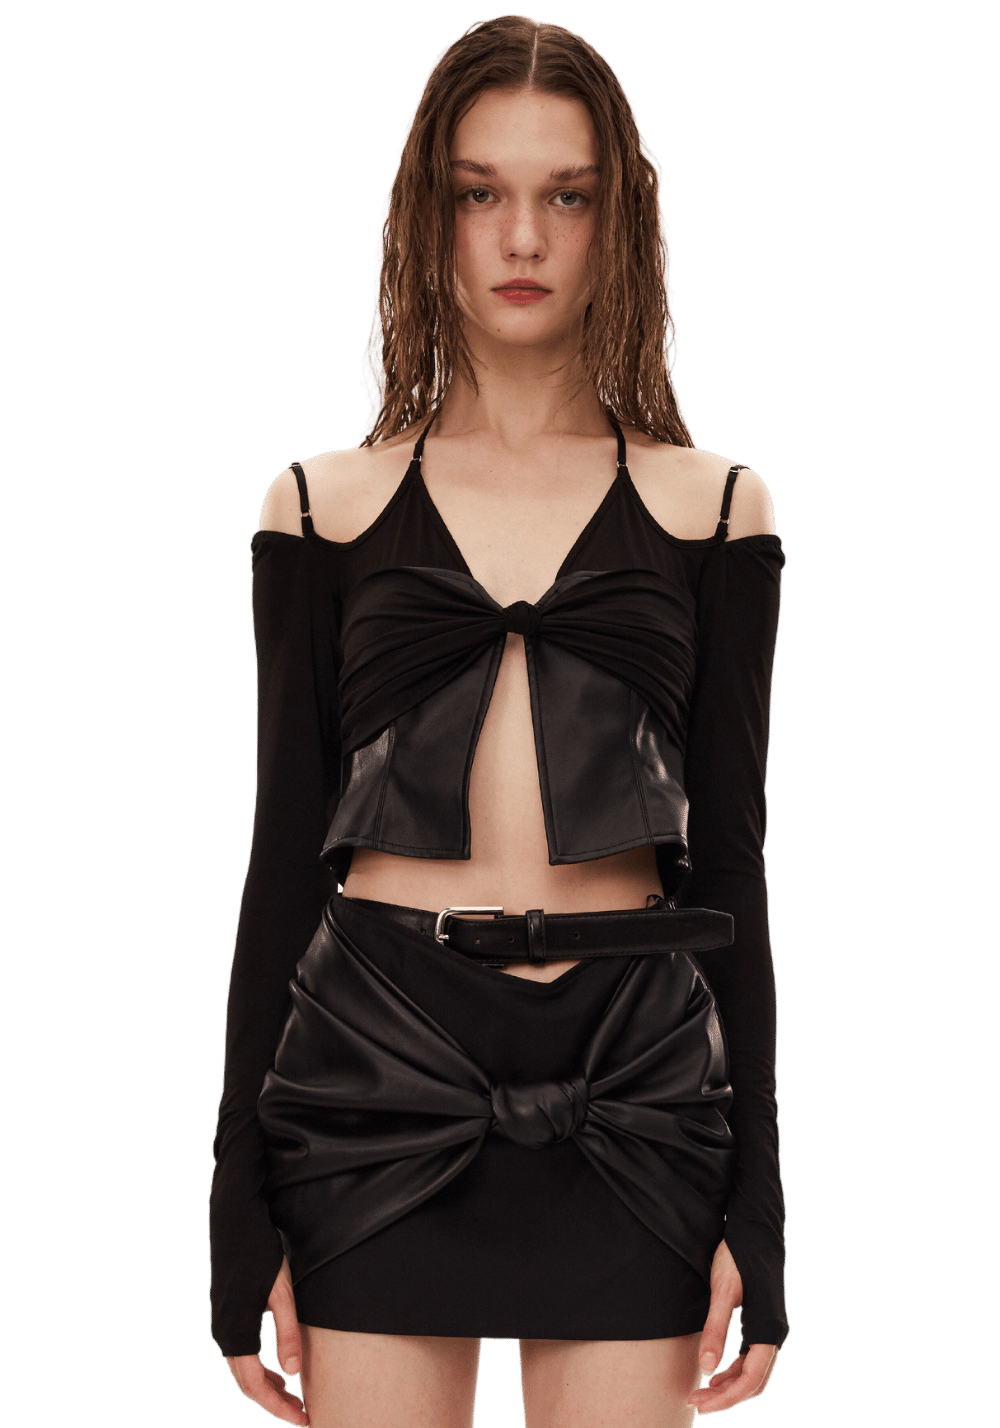 Knitted Spliced Leather Knot Top - PSYLOS 1, Knitted Spliced Leather Knot Top, Shirt, LEEWEI, PSYLOS 1